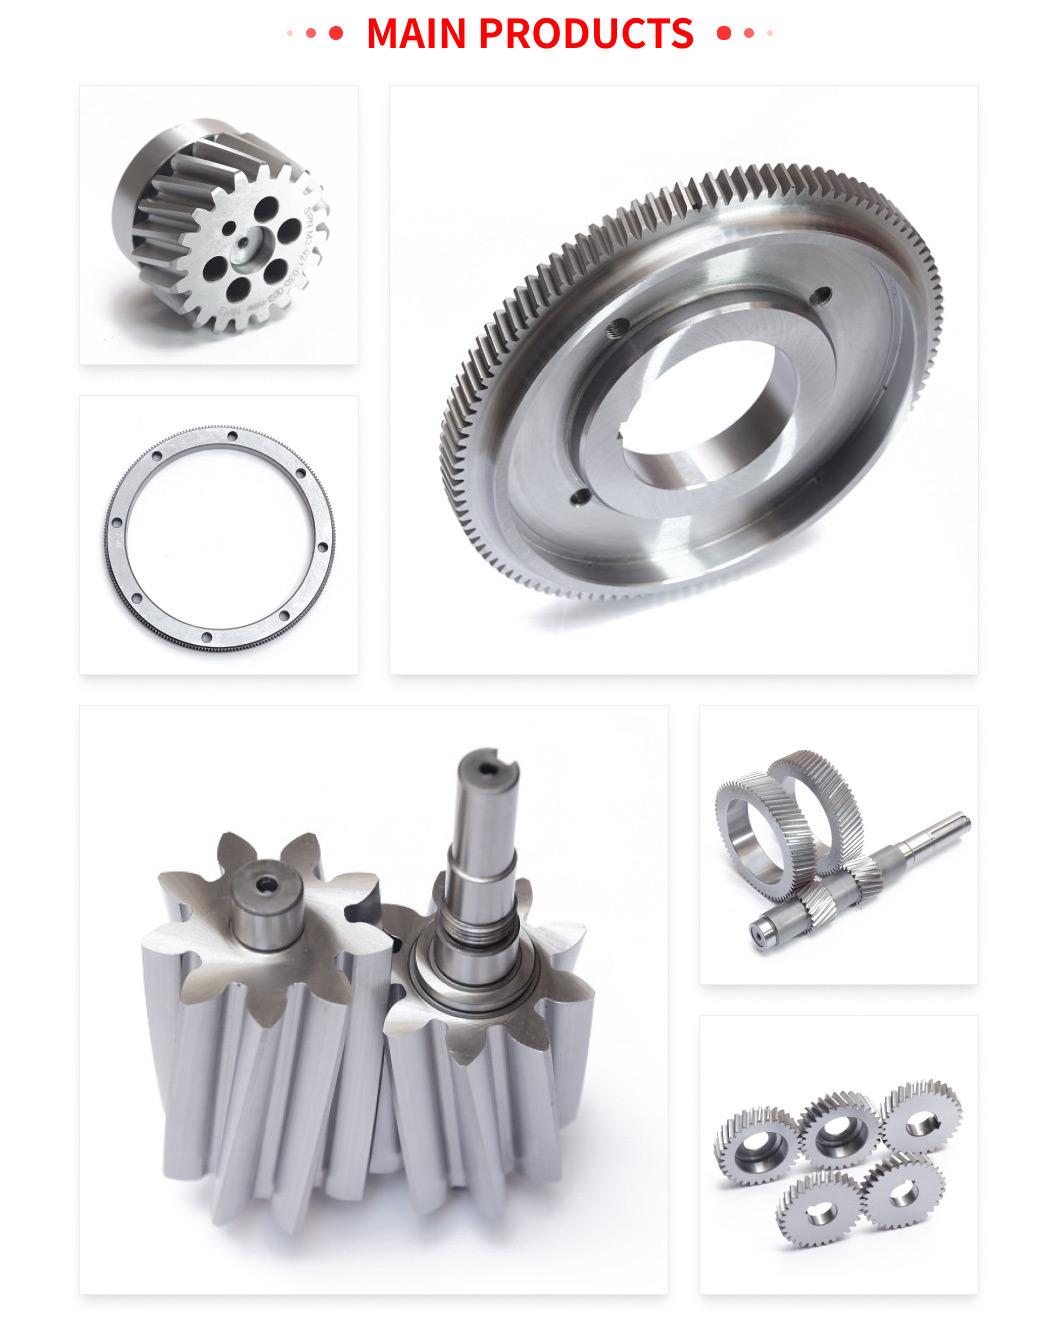 Customized Car OEM External Rack Gears Spur Helical Gear with Low Price